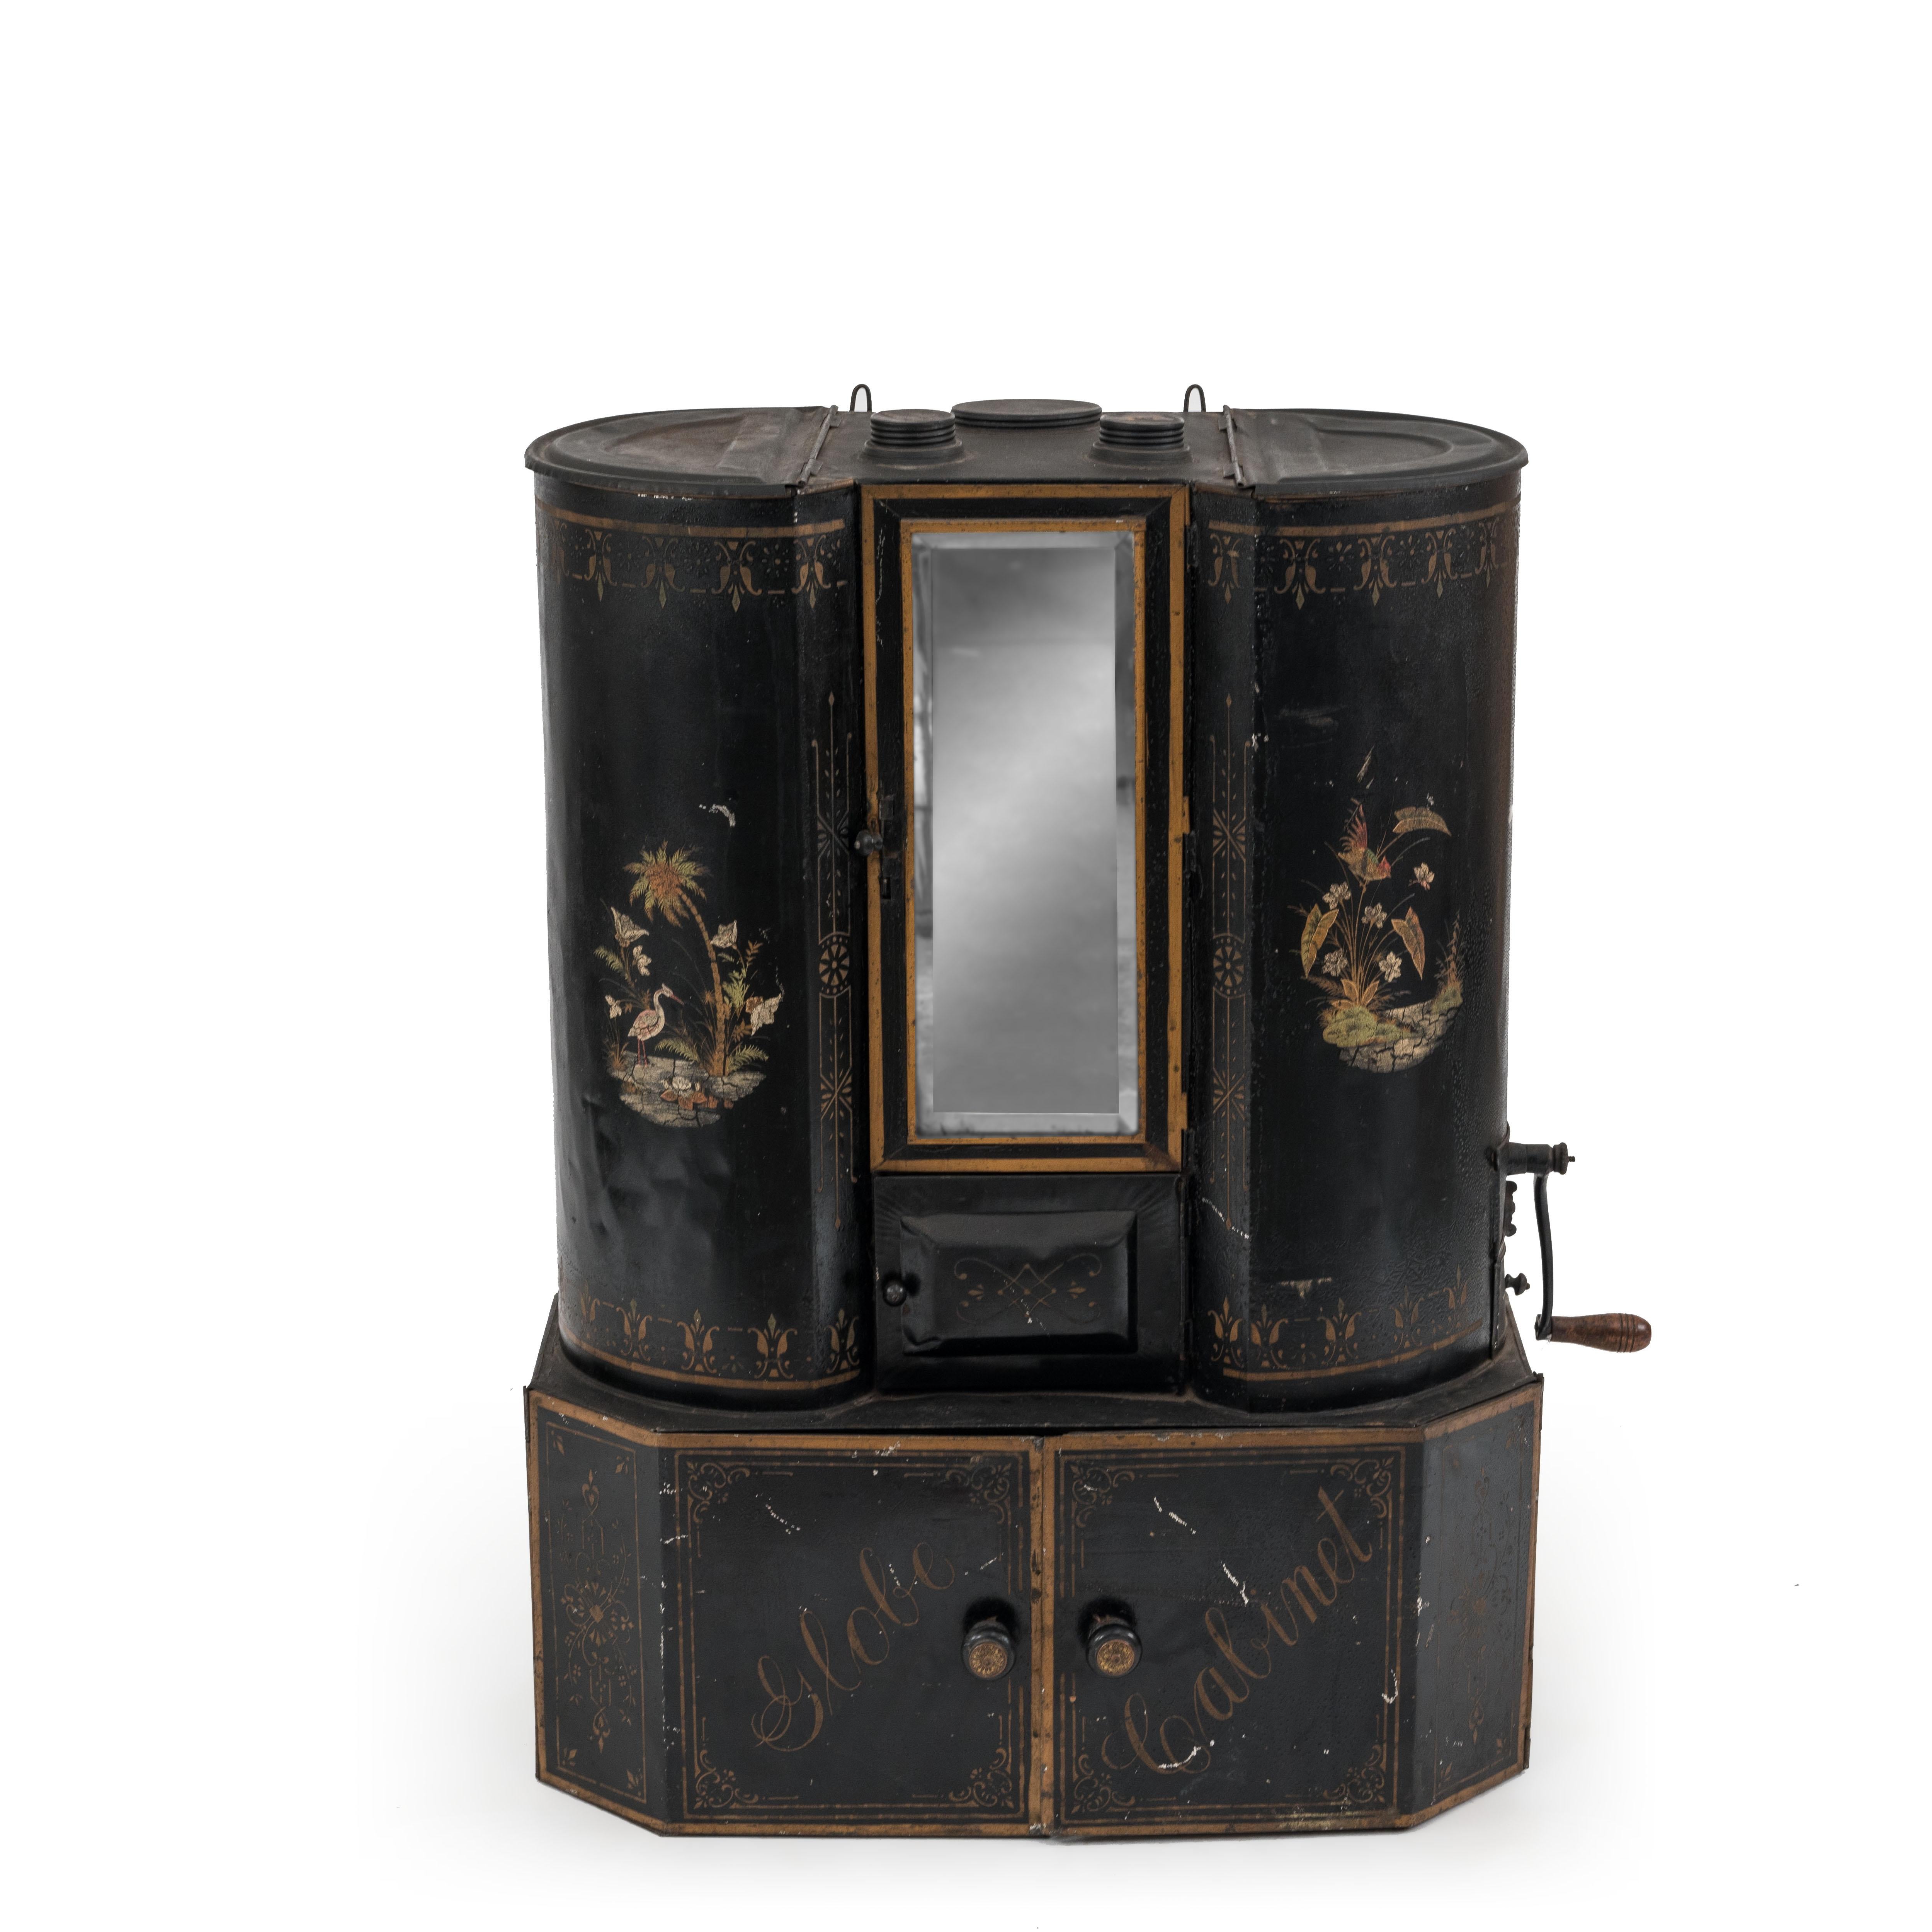 American Victorian black tole decorated spice hanging cabinet with mirror and flour sifter and coffee grinder.